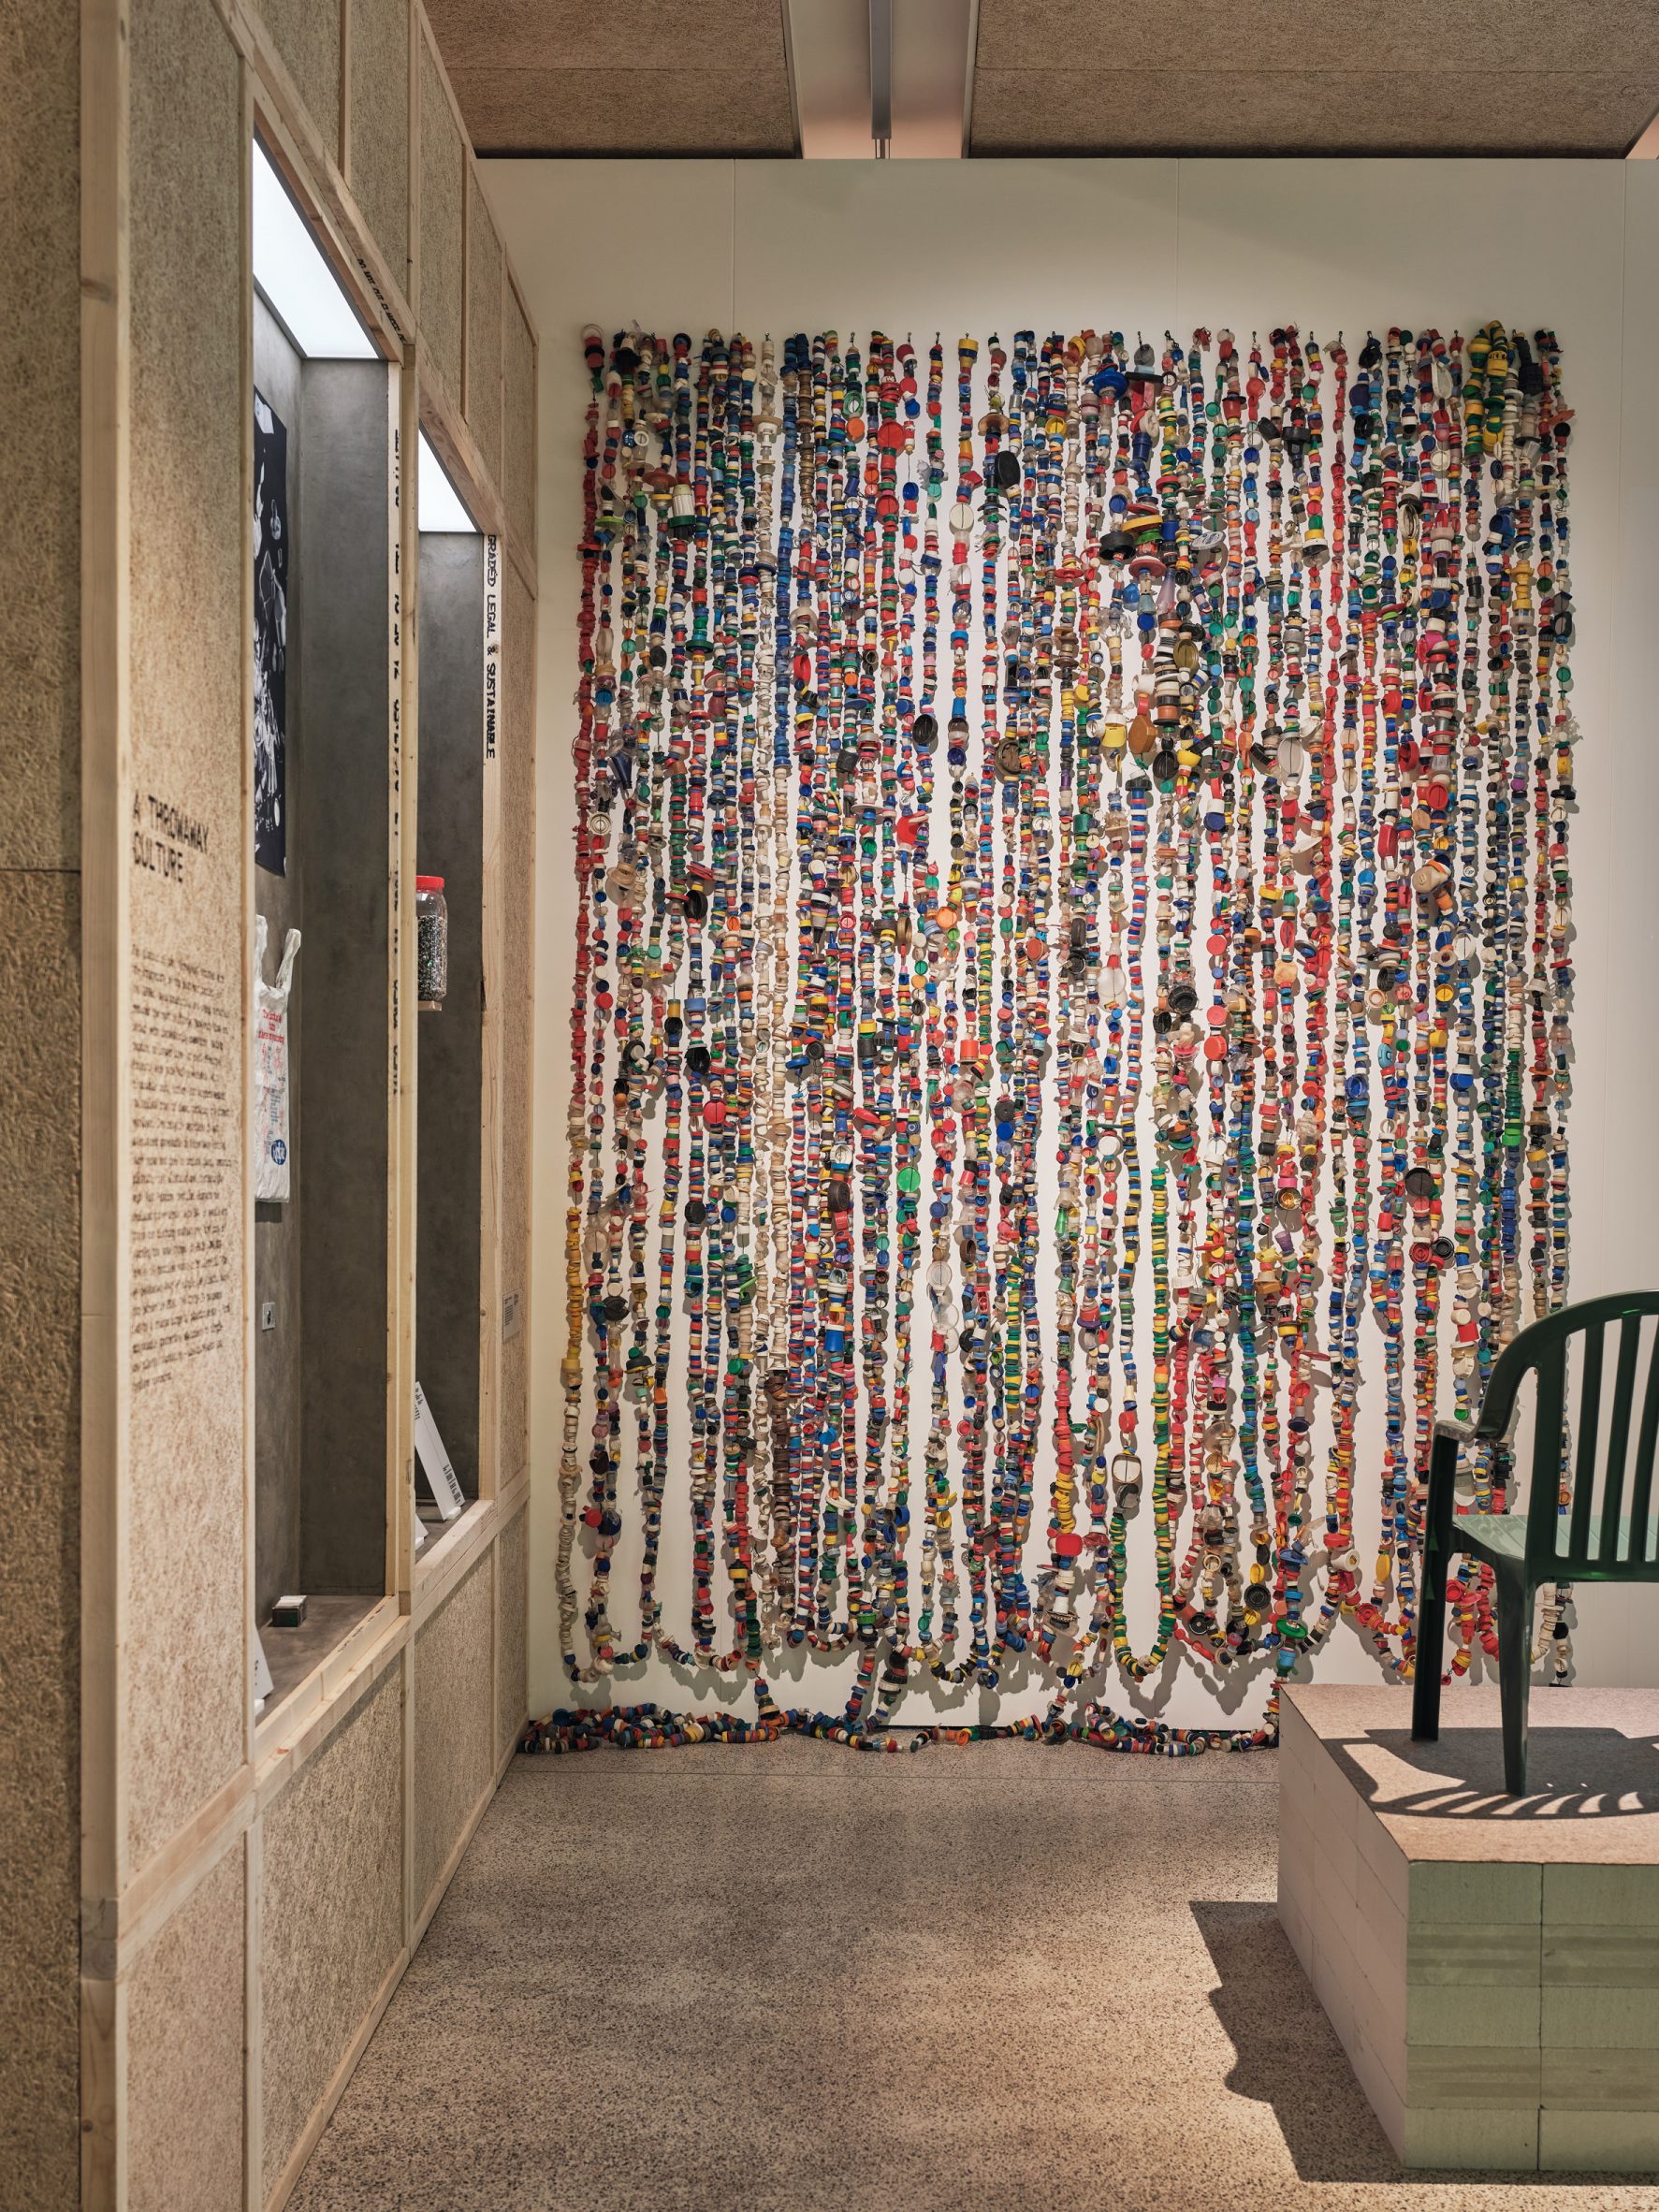 Installation showing waste plastic at Waste Age exhibition